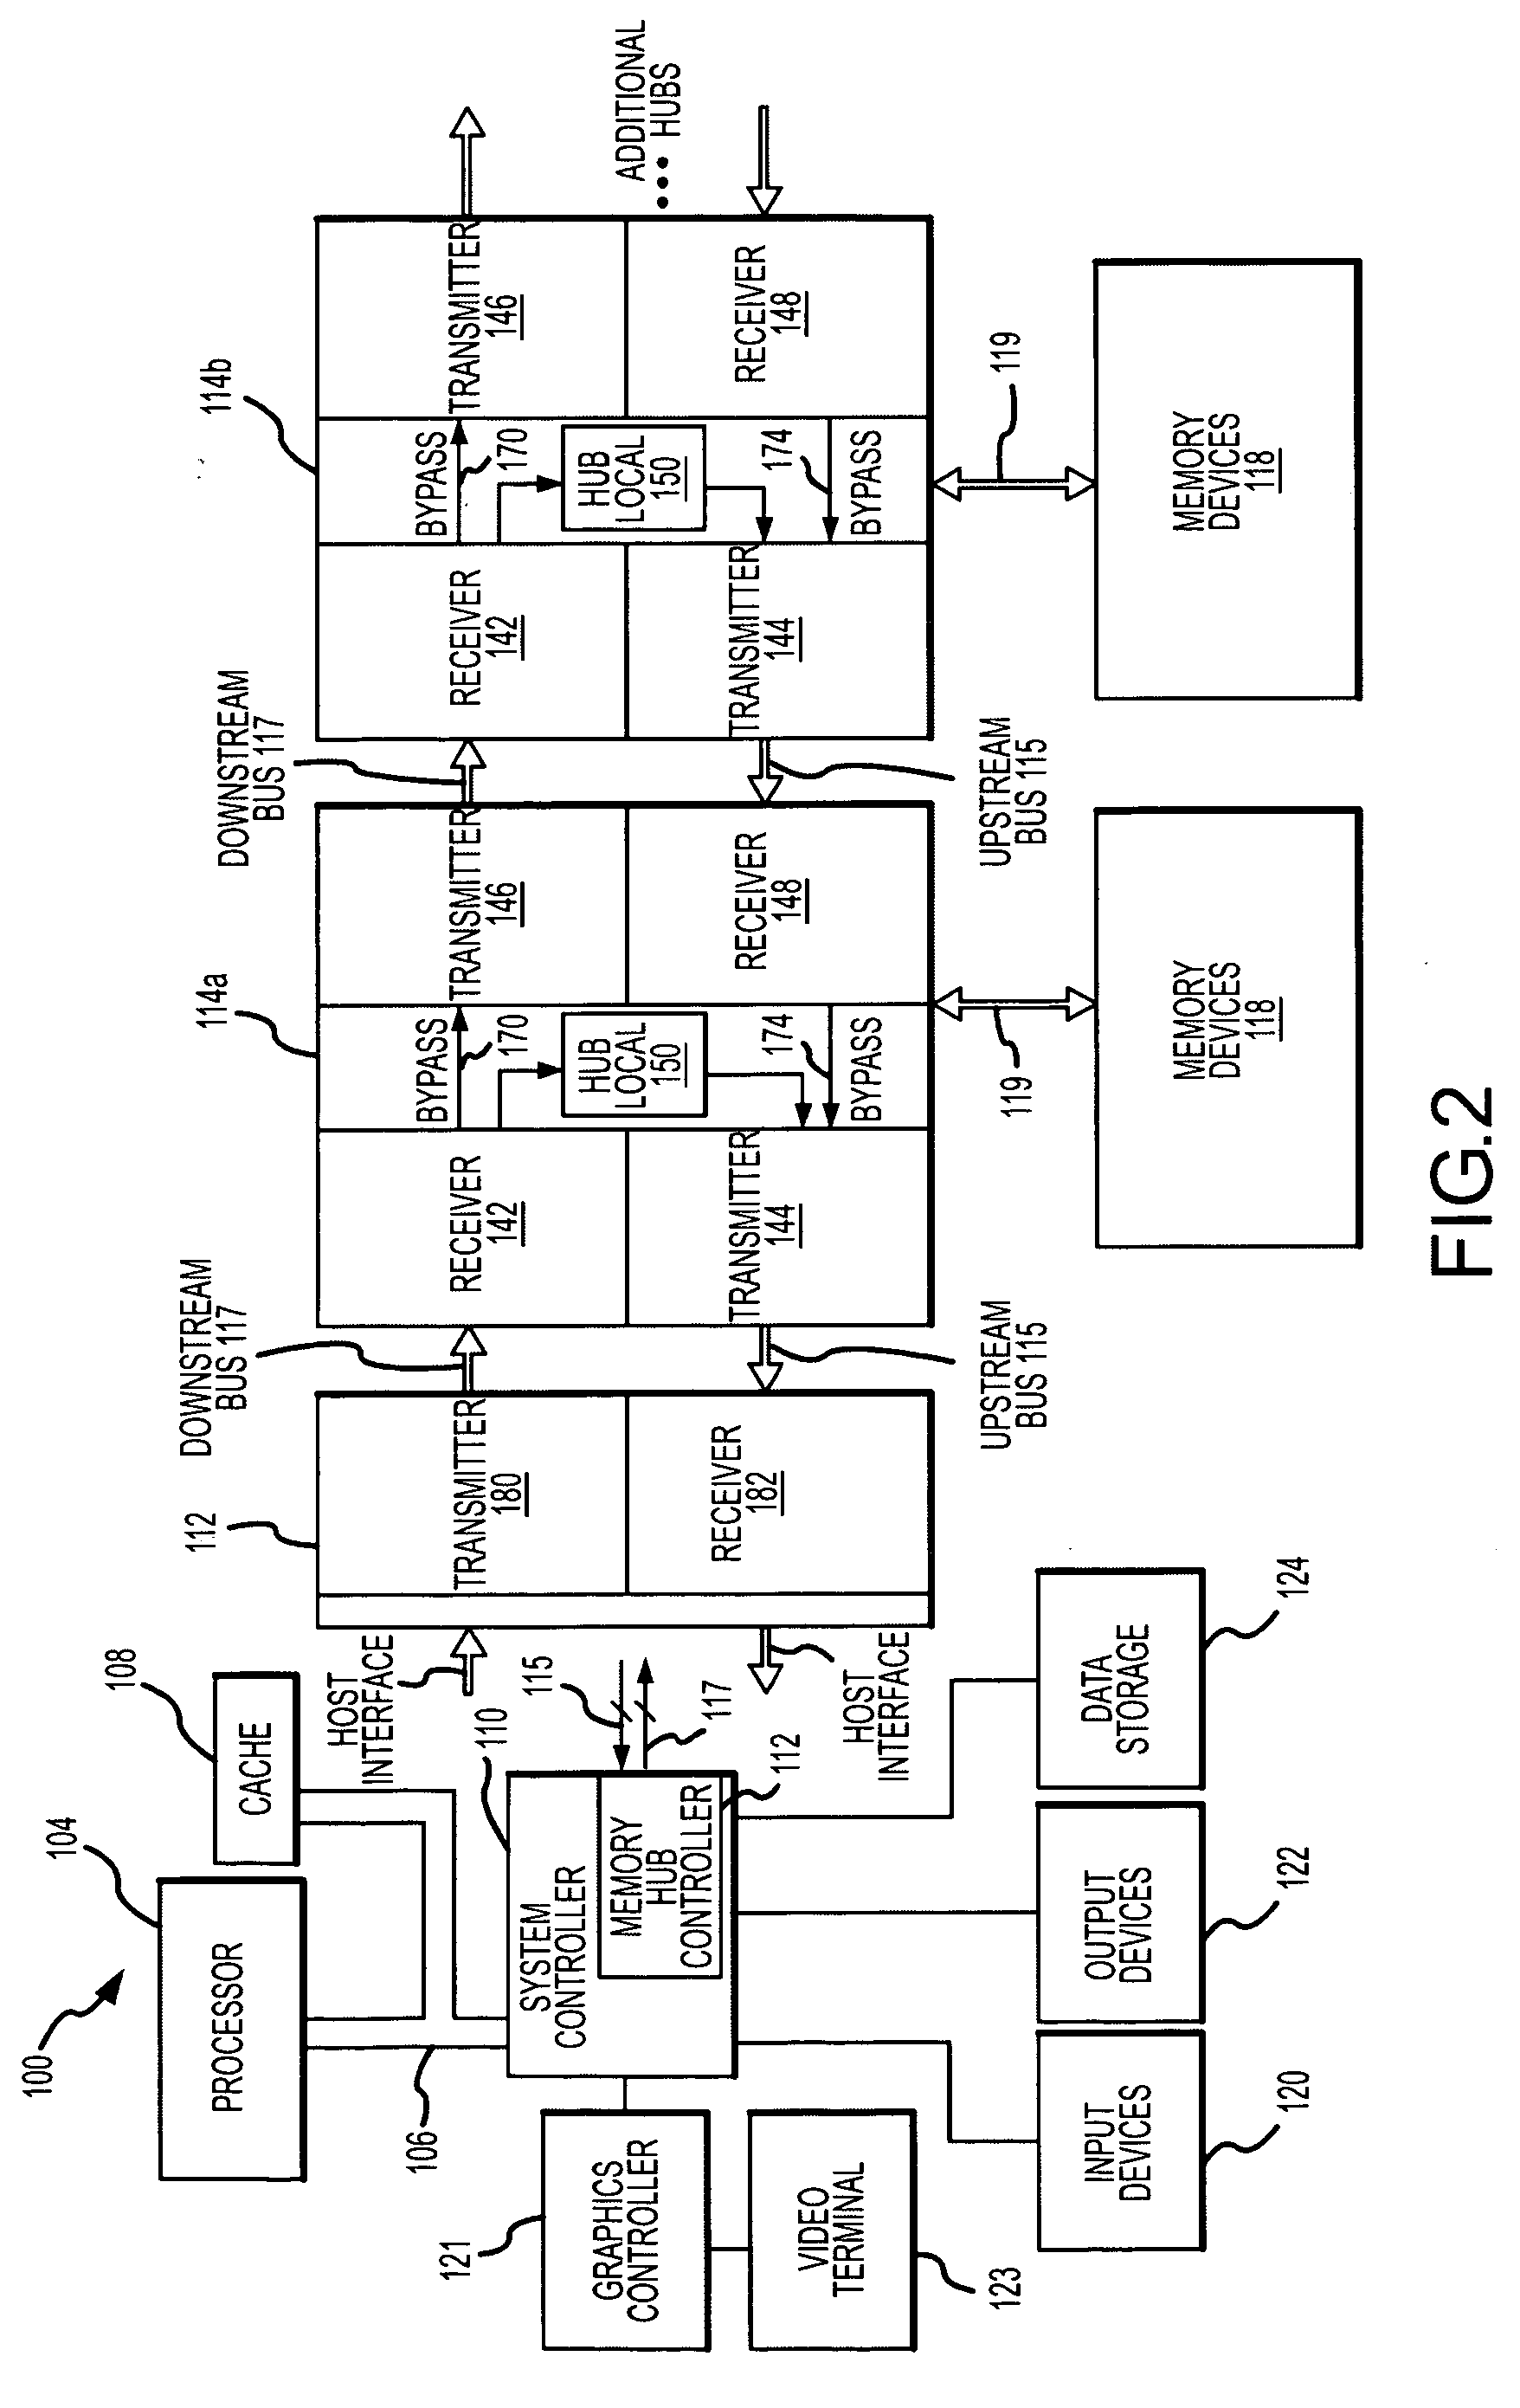 Memory hub system and method having large virtual page size